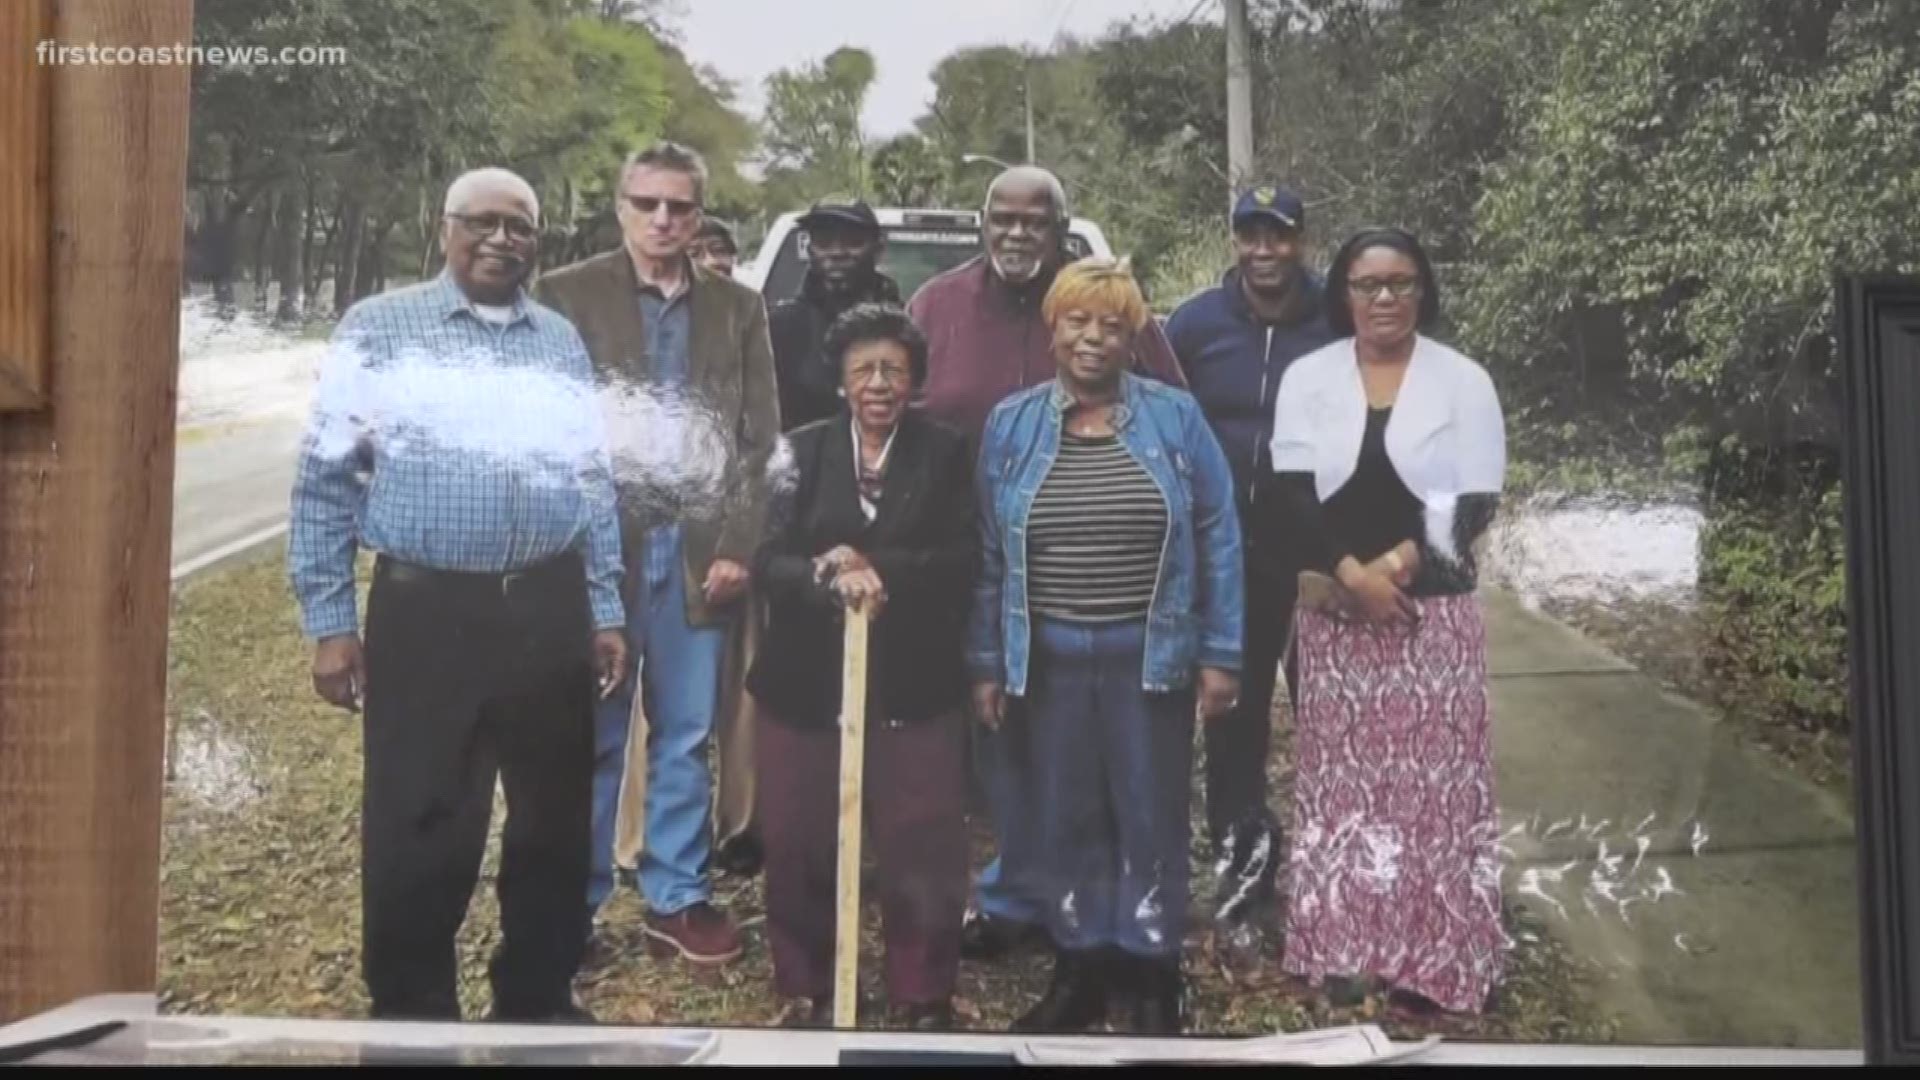 A soon-to-be-built park at the intersection of Fort Caroline Road and McCormick Road will honor the impact of people descended from slaves who called the area home.